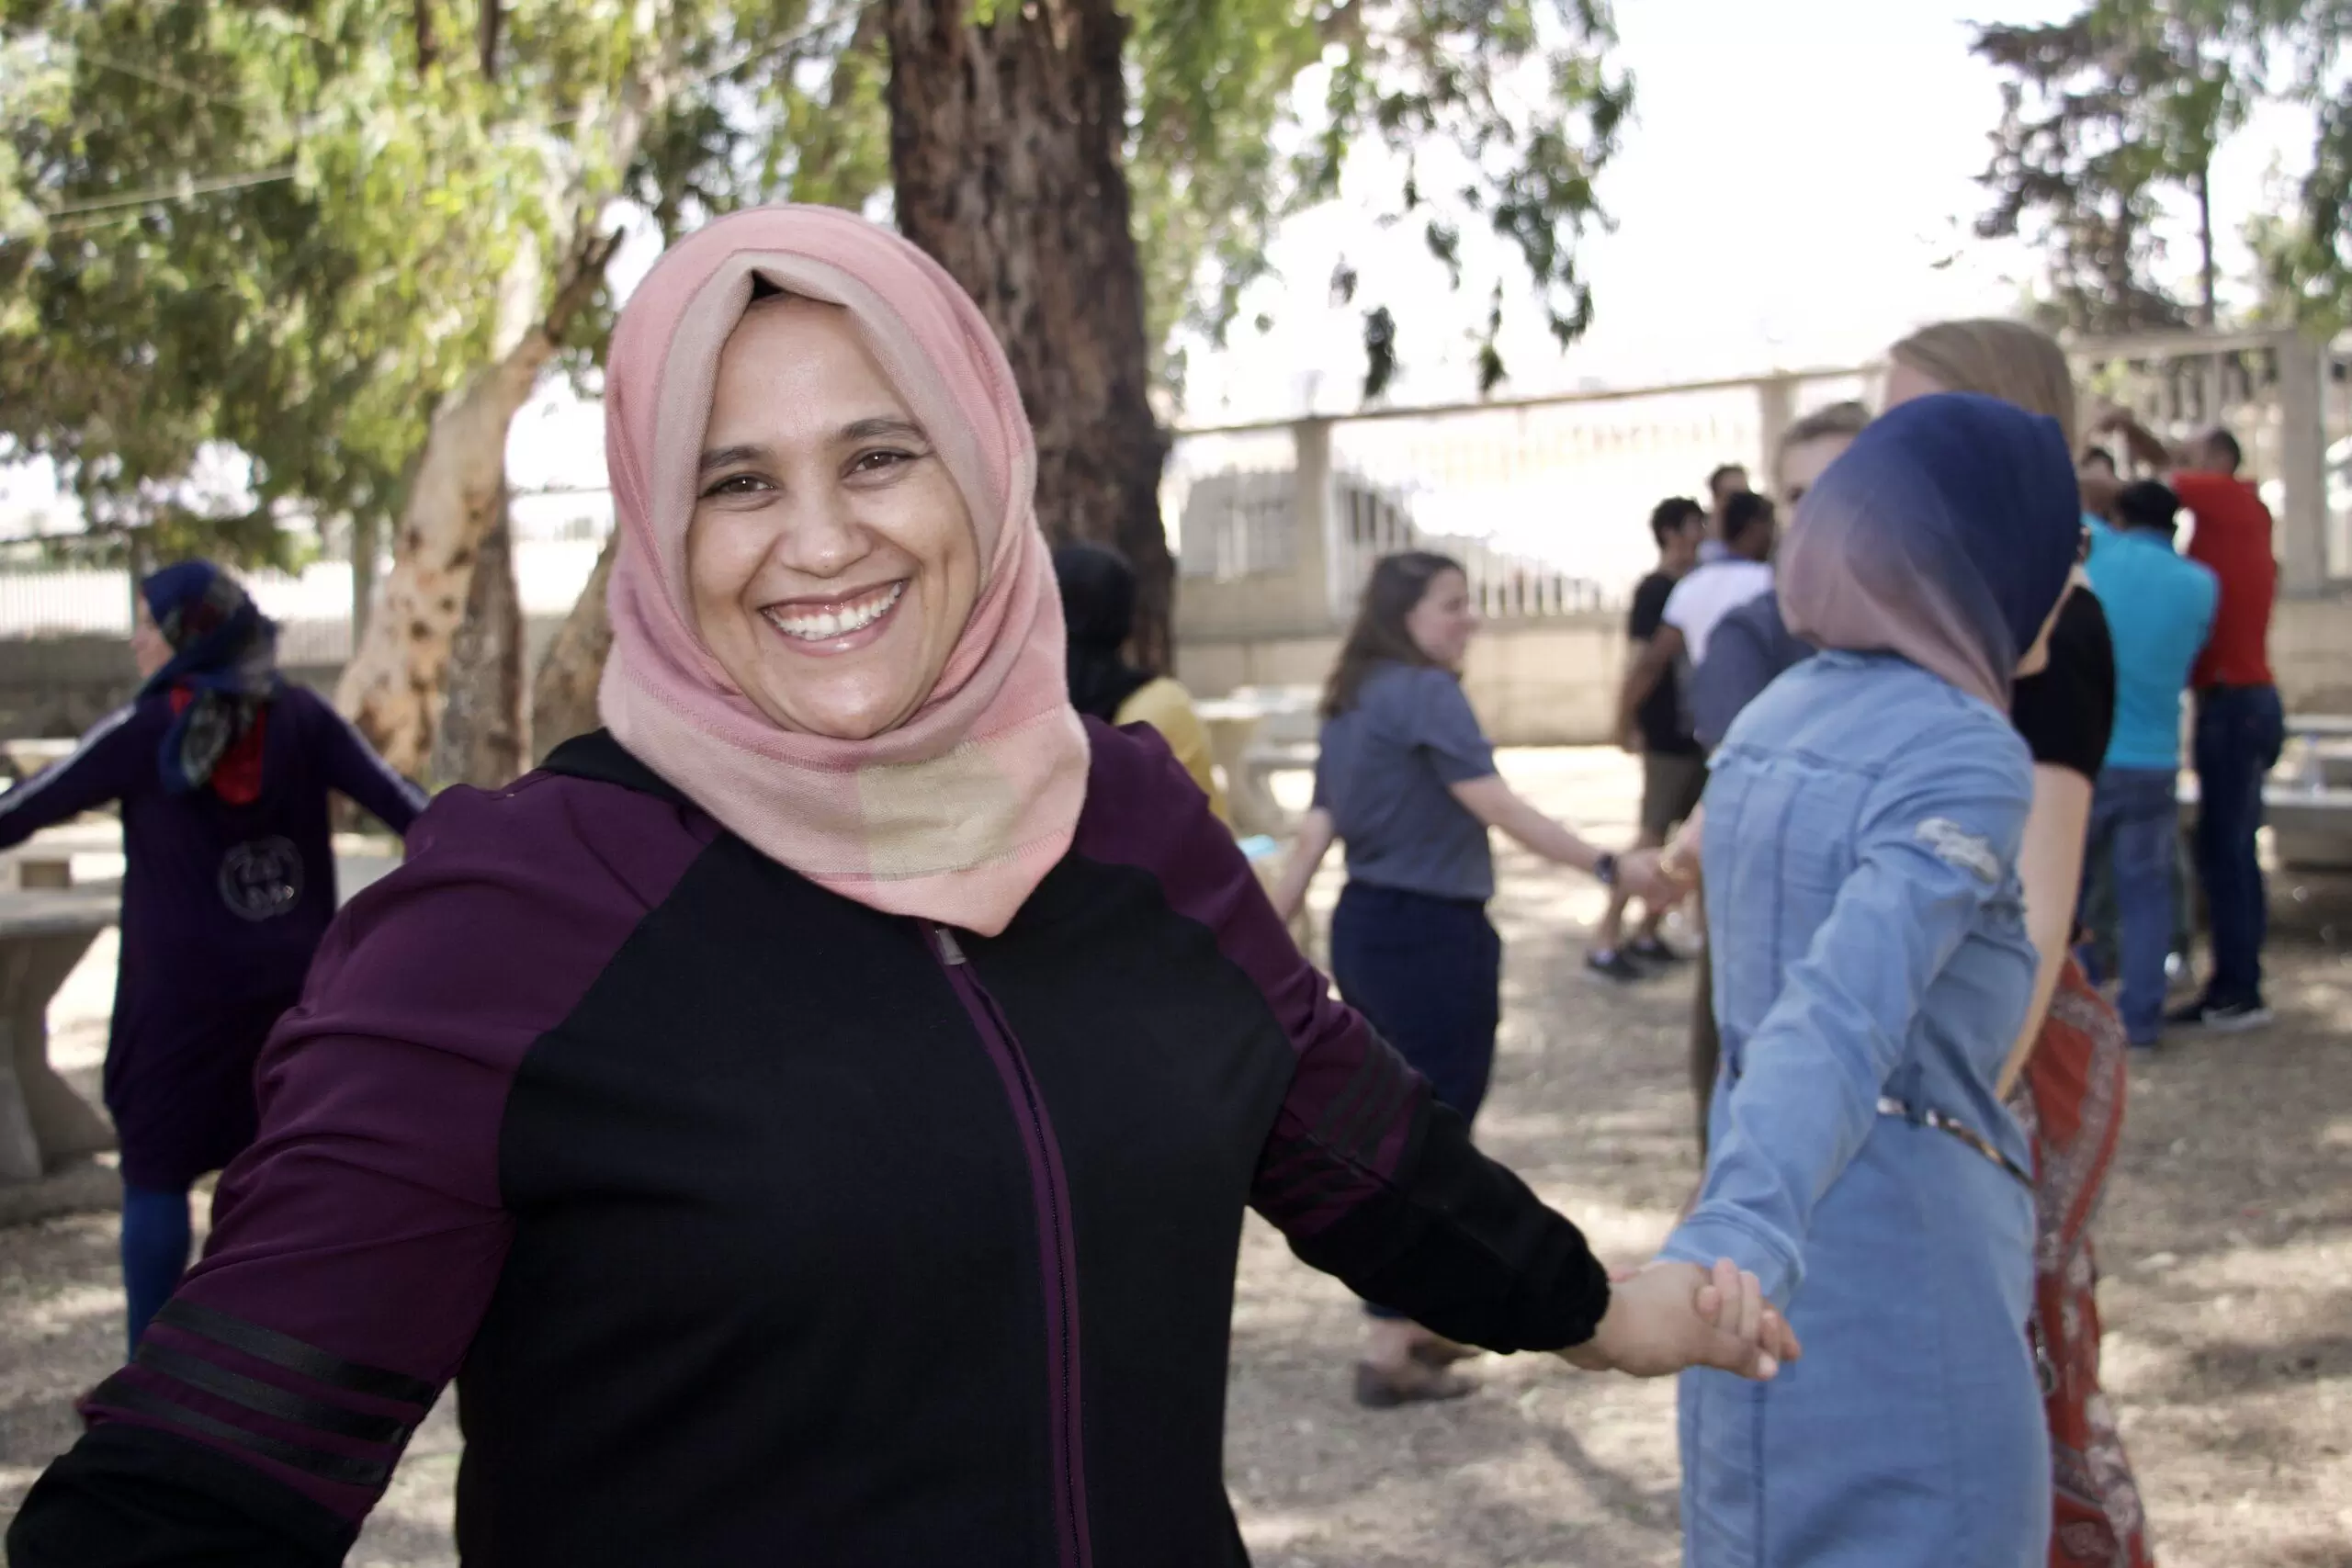 Looking back on a year of activities empowering refugee women and youth